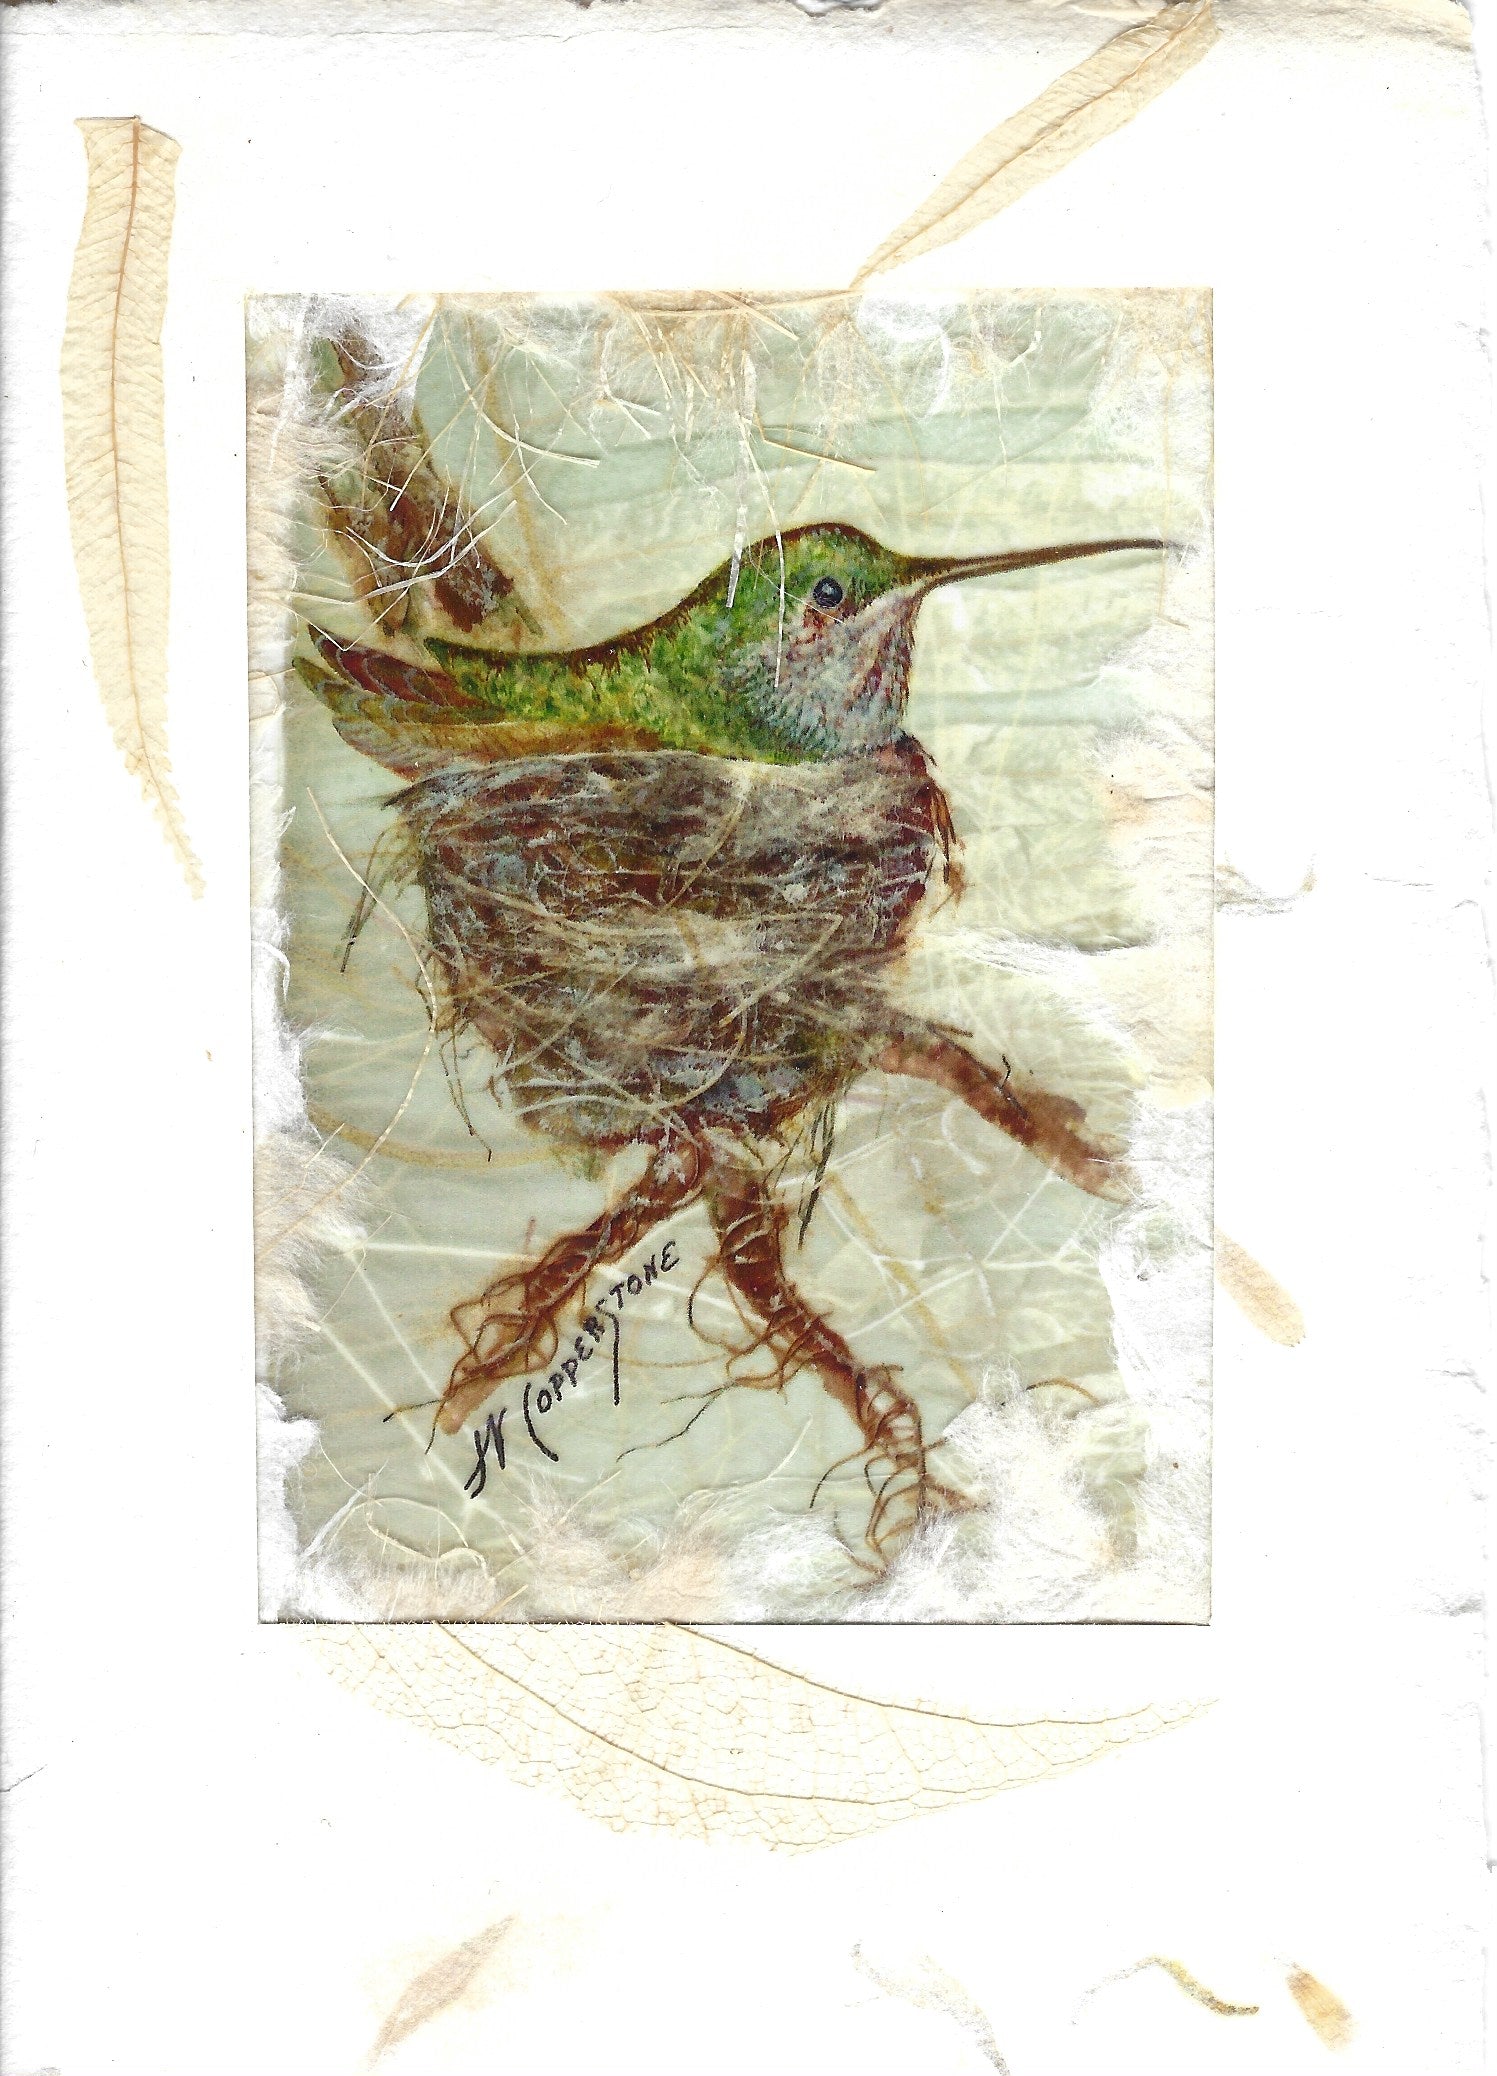 Hummingbird (Costa) in nest mixed media fine art print by Janice A. Copperstone of Milford, Mich.  